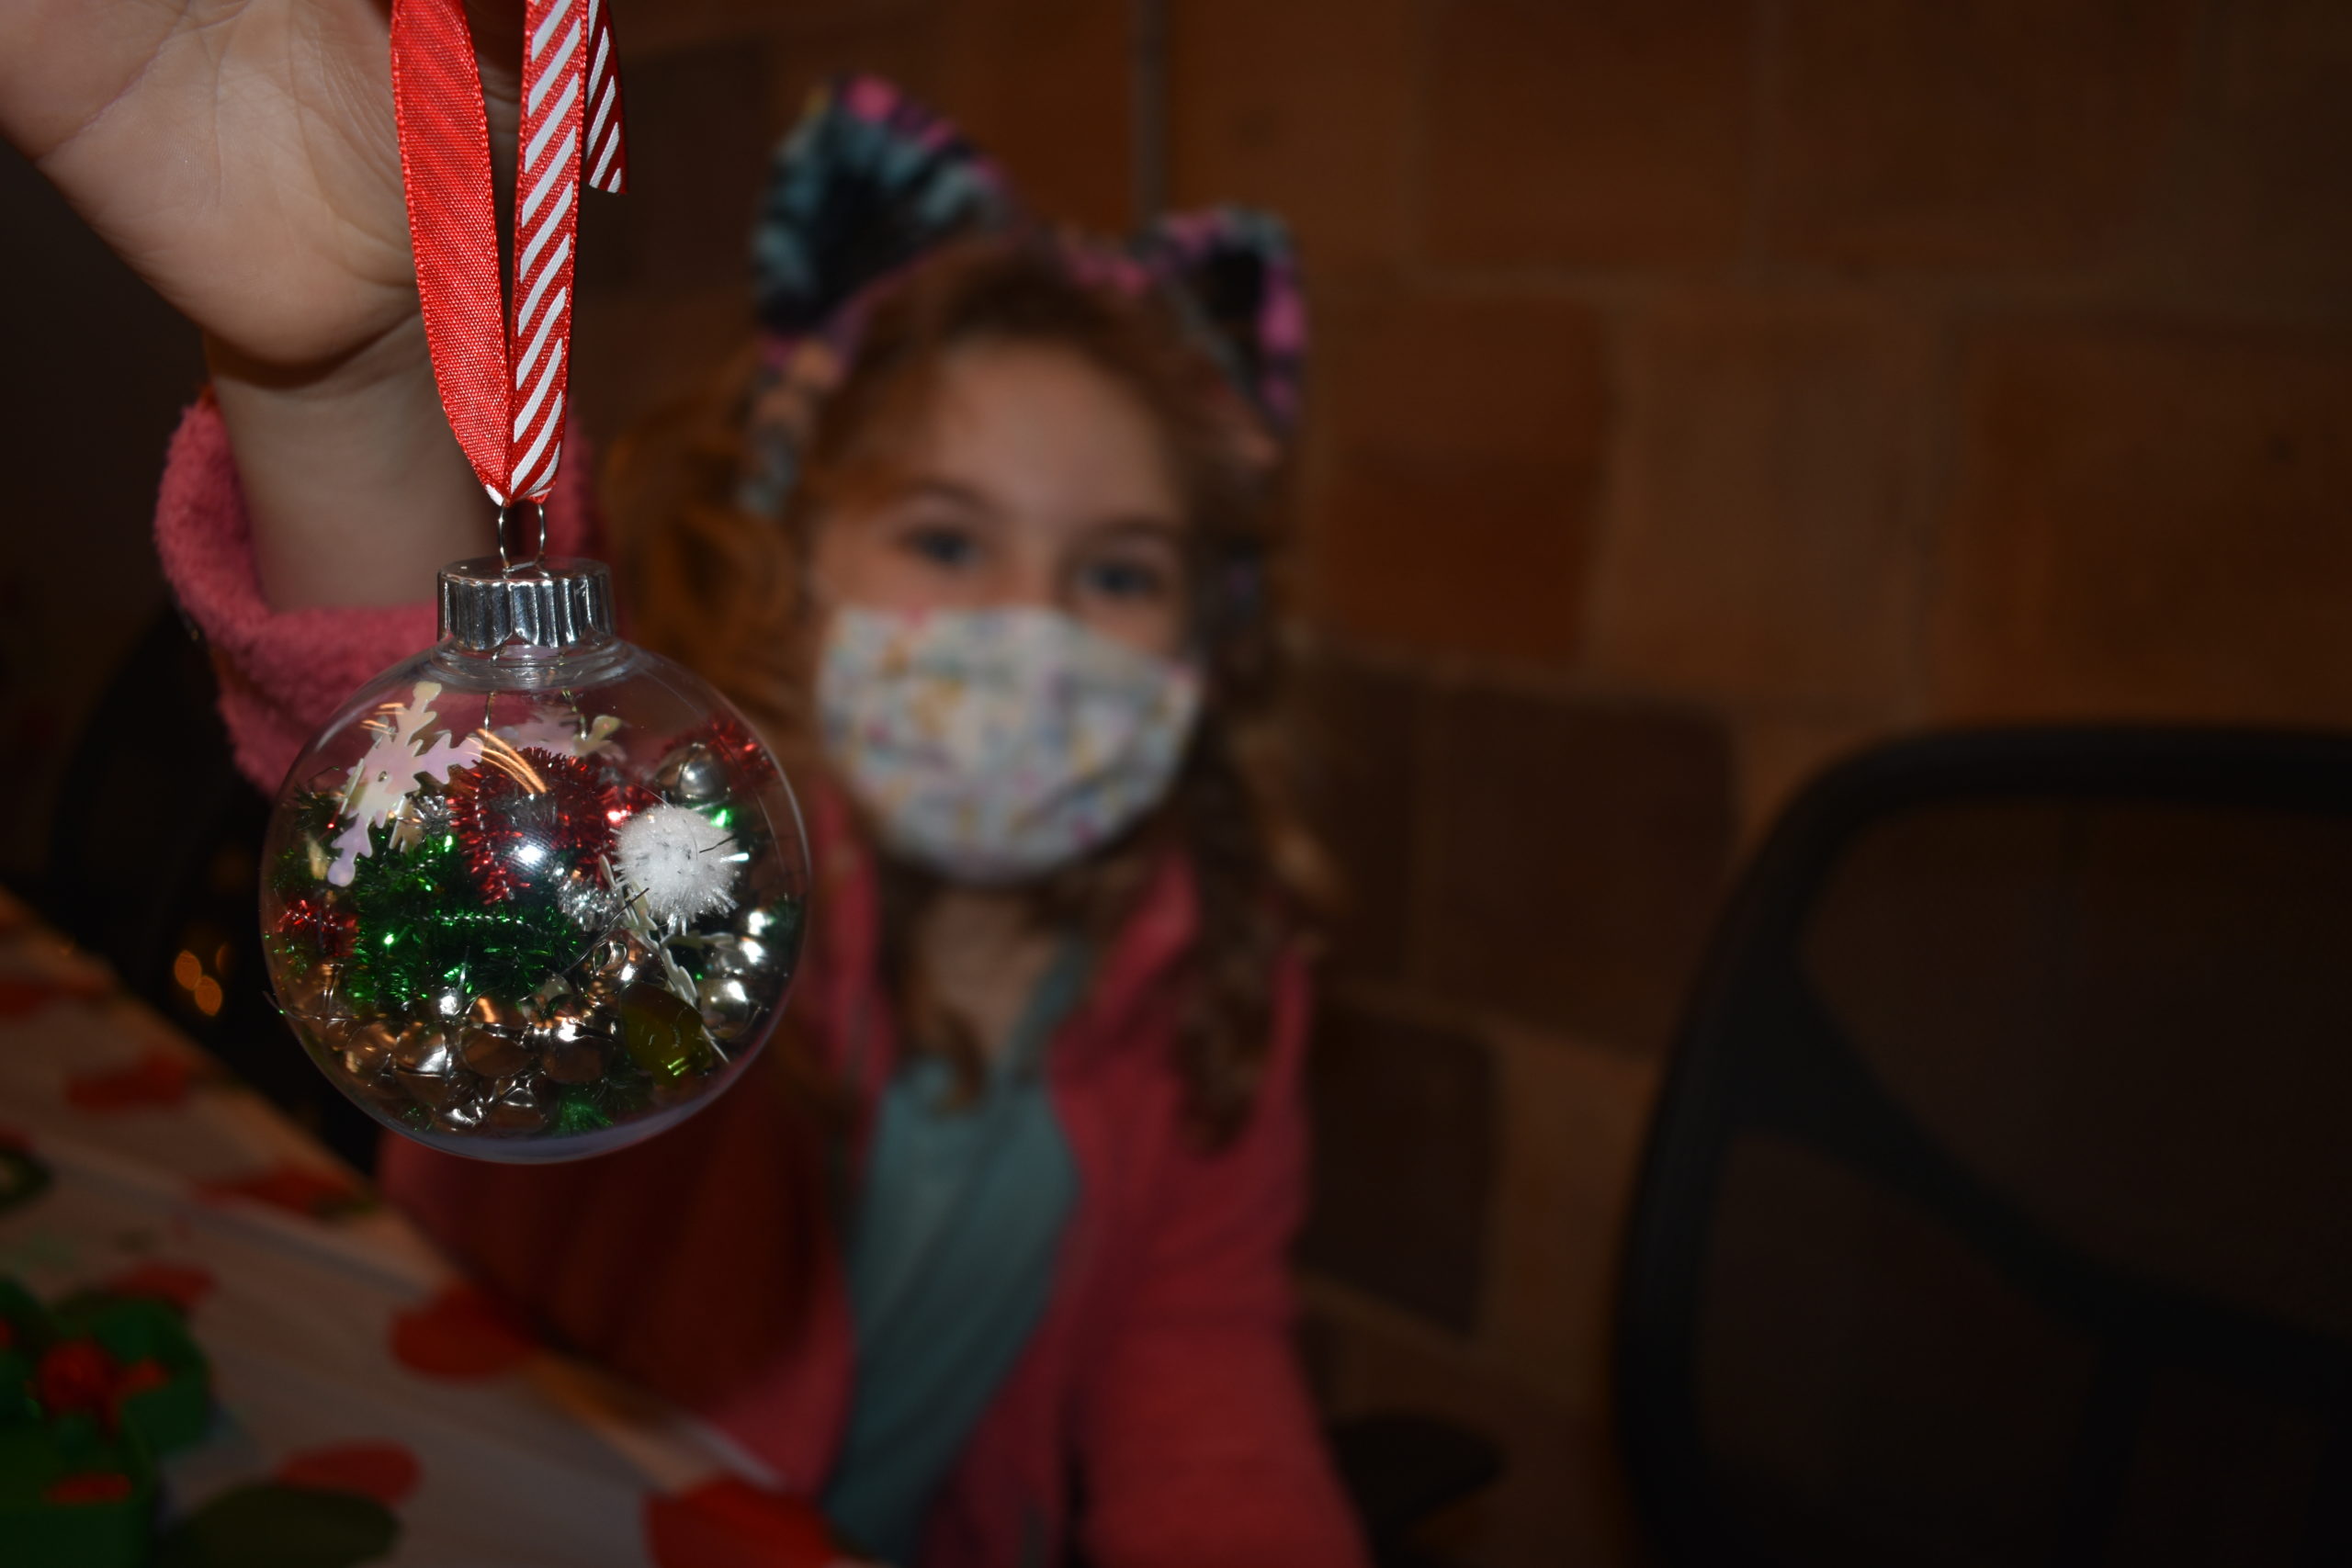 A girl holds up an ornament she made at a holiday party